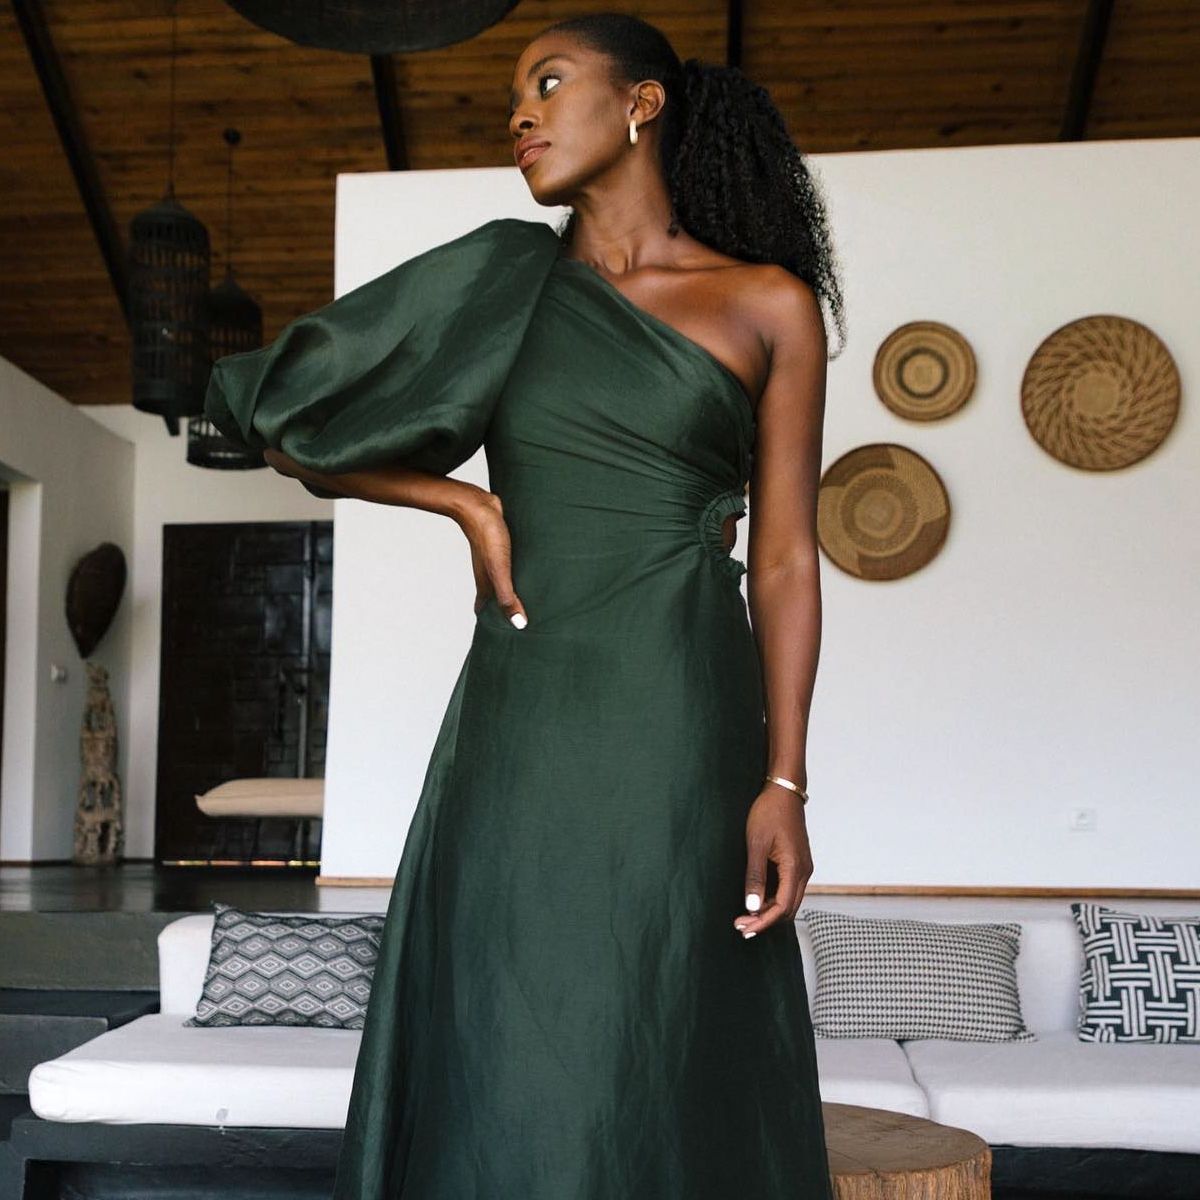 Hands Down, These Are the Prettiest 6 Dress Trends of 2023